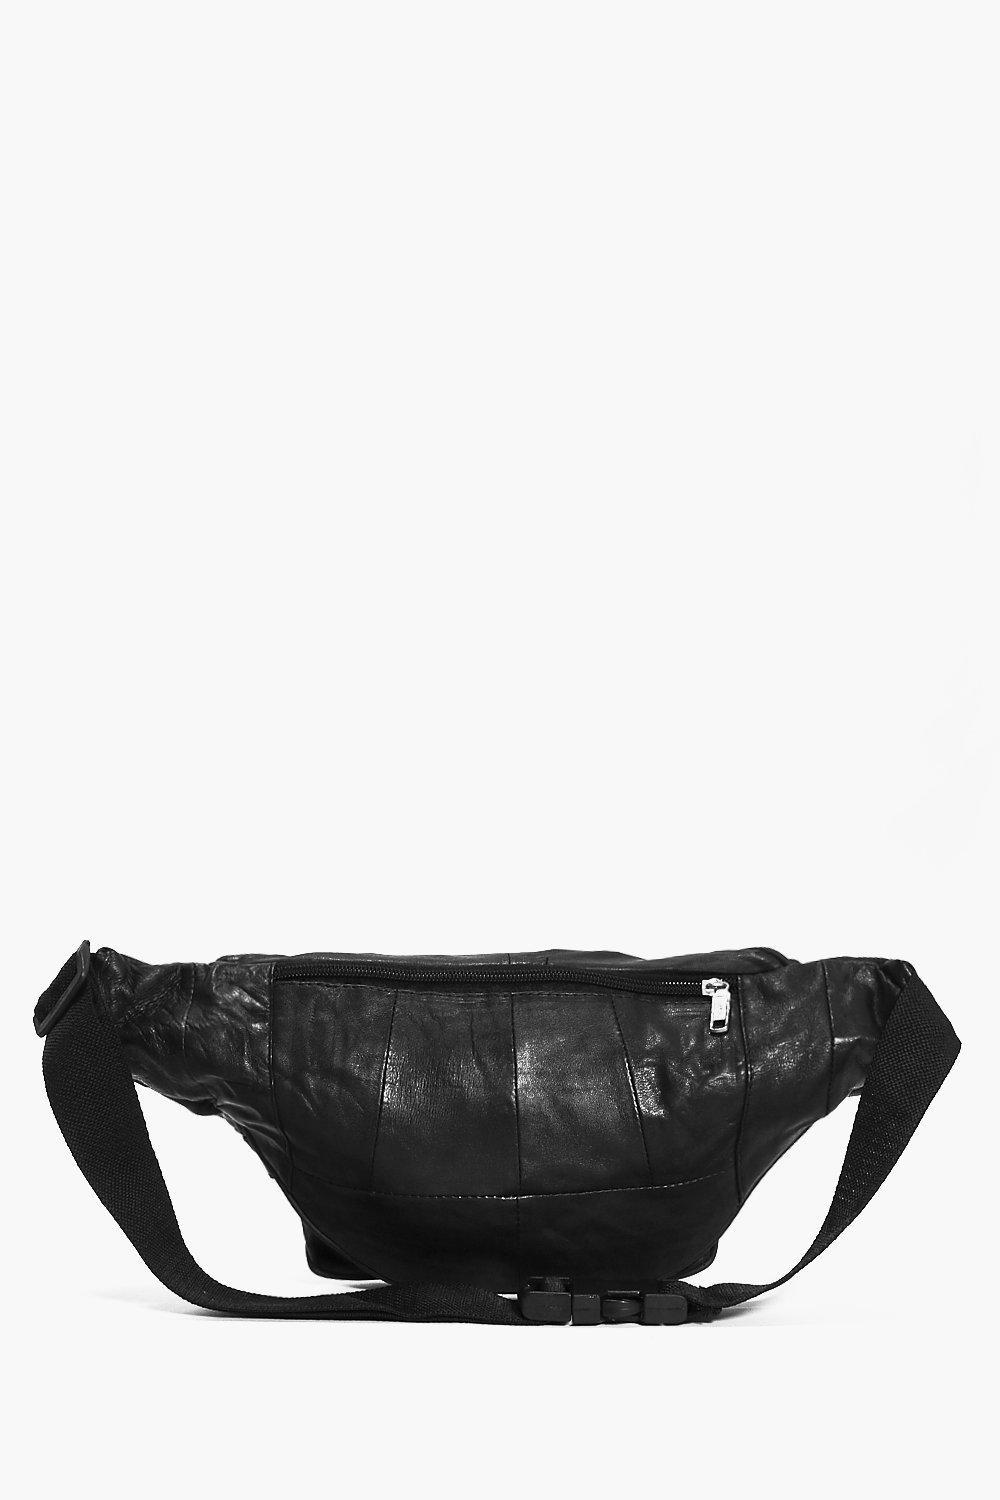 Leather Bum Bags Mens | IUCN Water